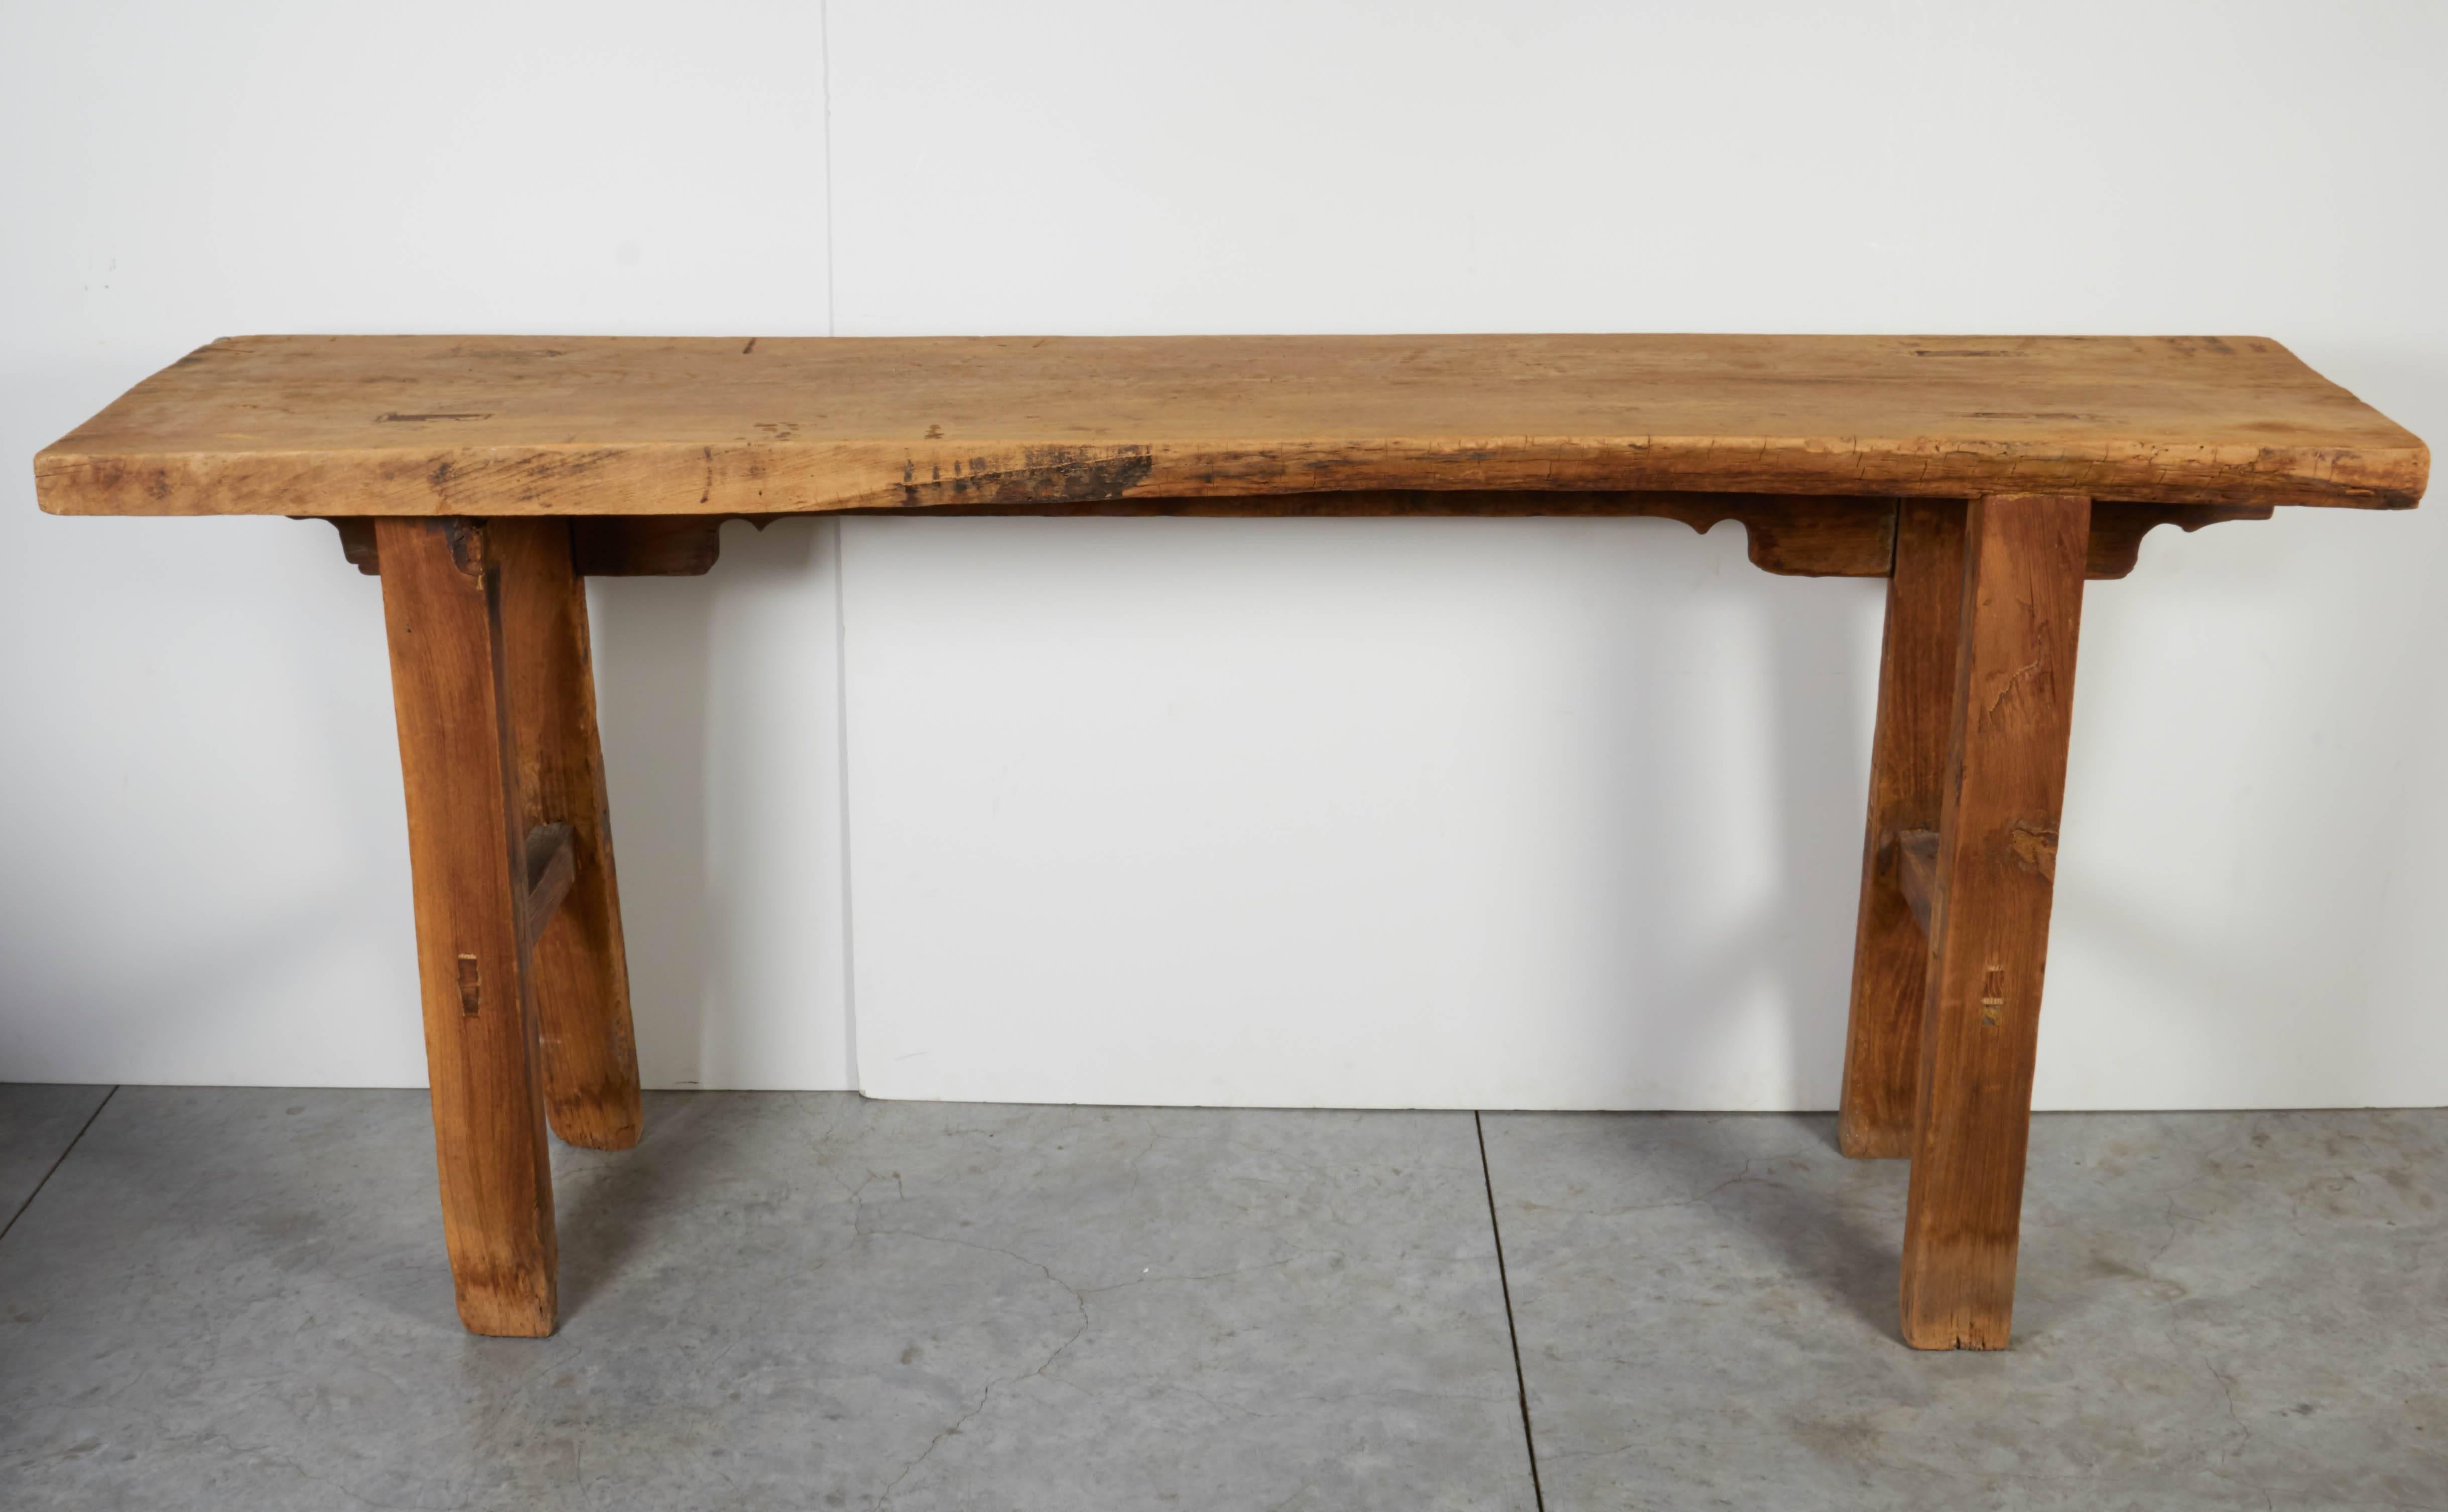 An unusual double sided vintage Chinese farm table constructed from a very thick century old tabletop and sturdy legs. Each side presents a different look. One side is a simple farm table design. The other side presents Classic Chinese wine table